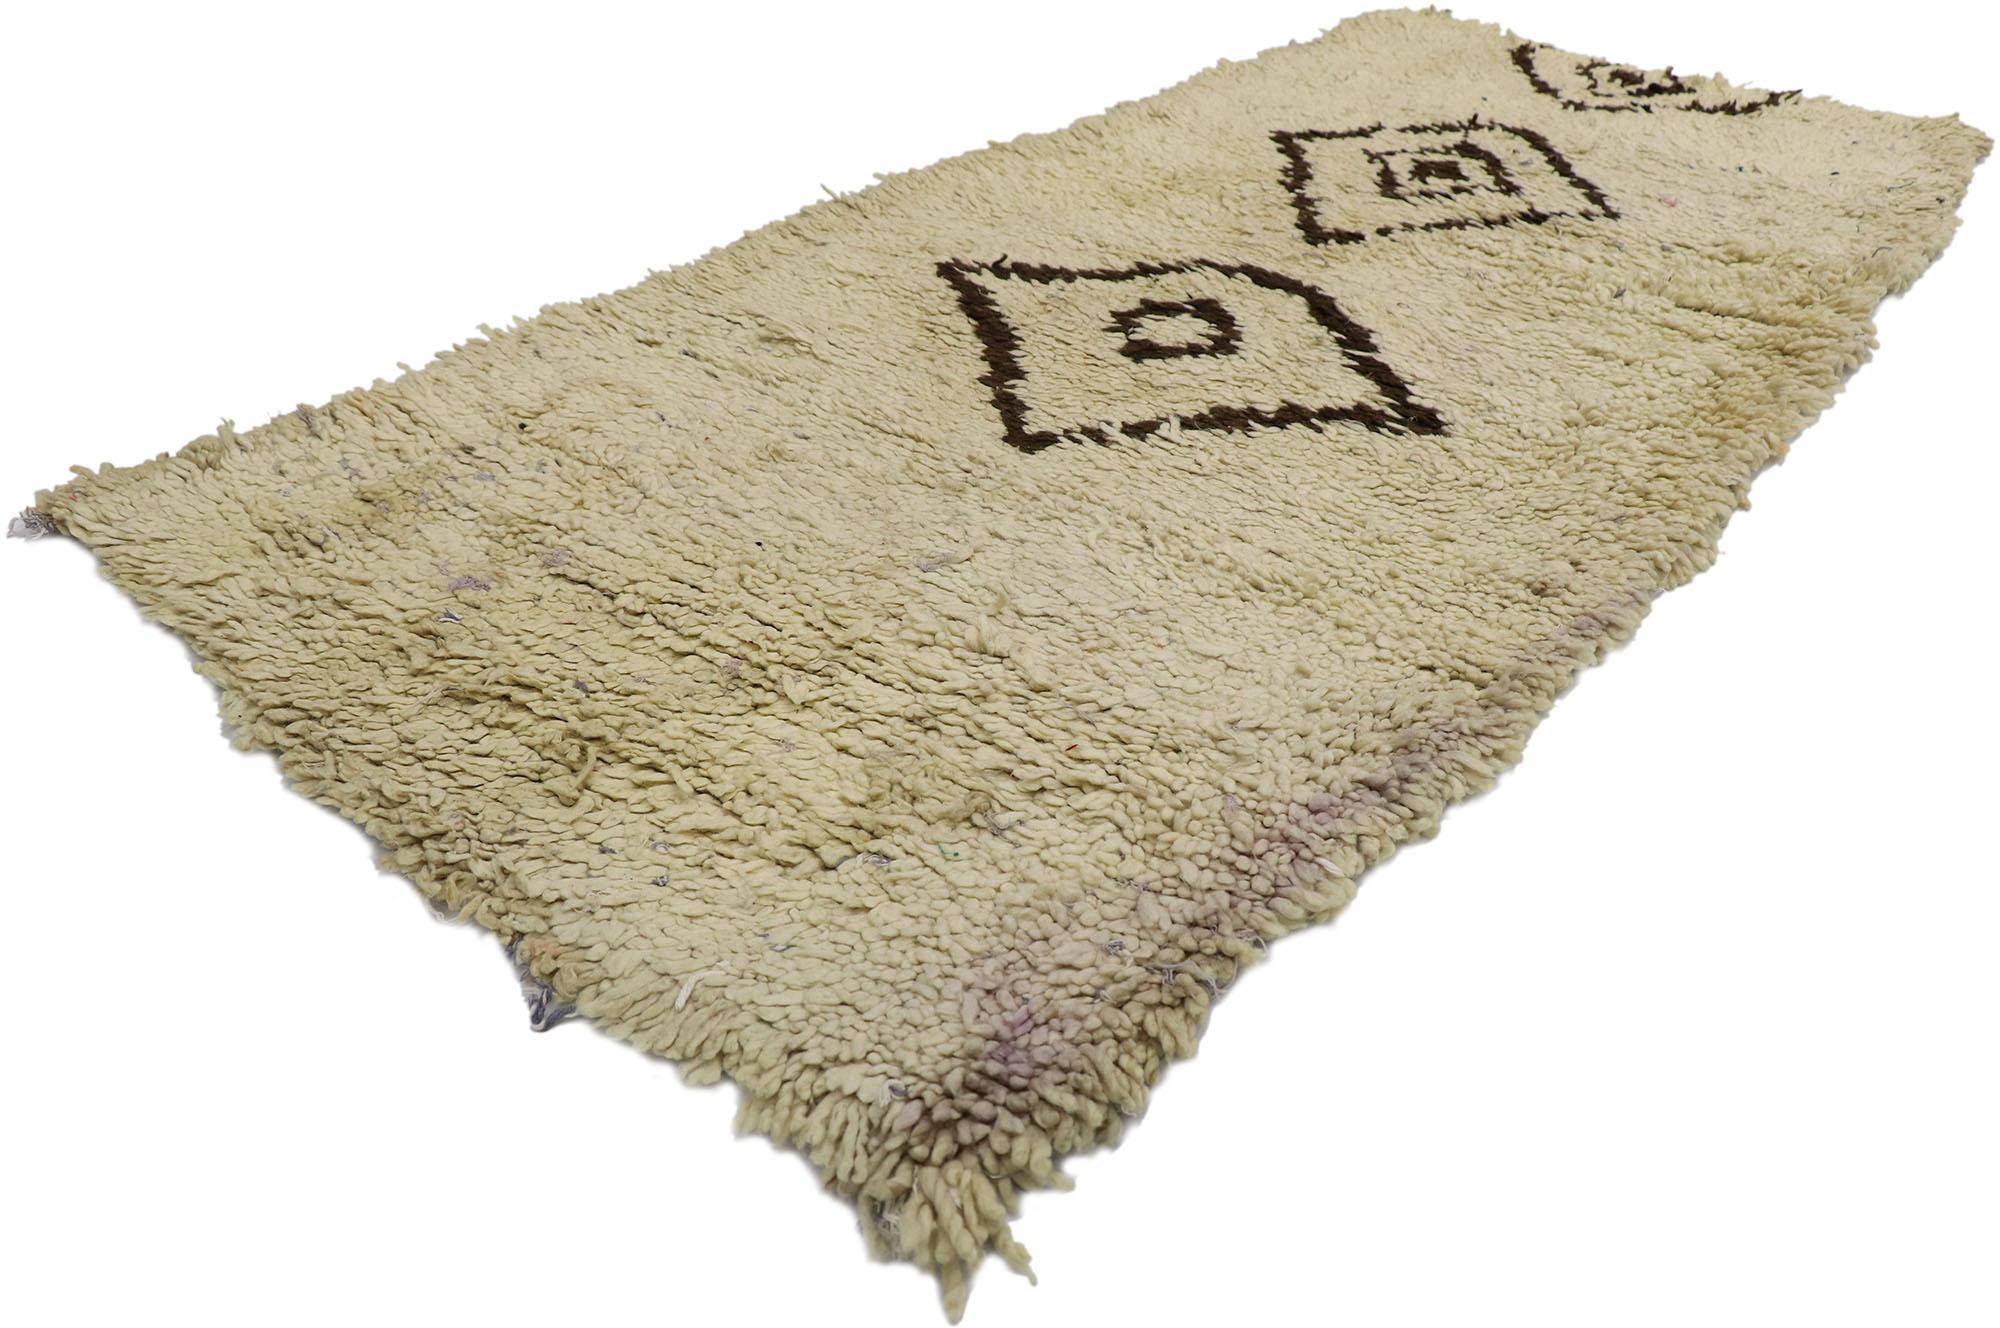 21543 Vintage Berber Moroccan Azilal rug with Mid-Century Modern style 02'08 x 05'06. With its simplicity, Mid-Century Modern style, incredible detail and texture, this hand knotted wool vintage Berber Moroccan Azilal rug is a captivating vision of